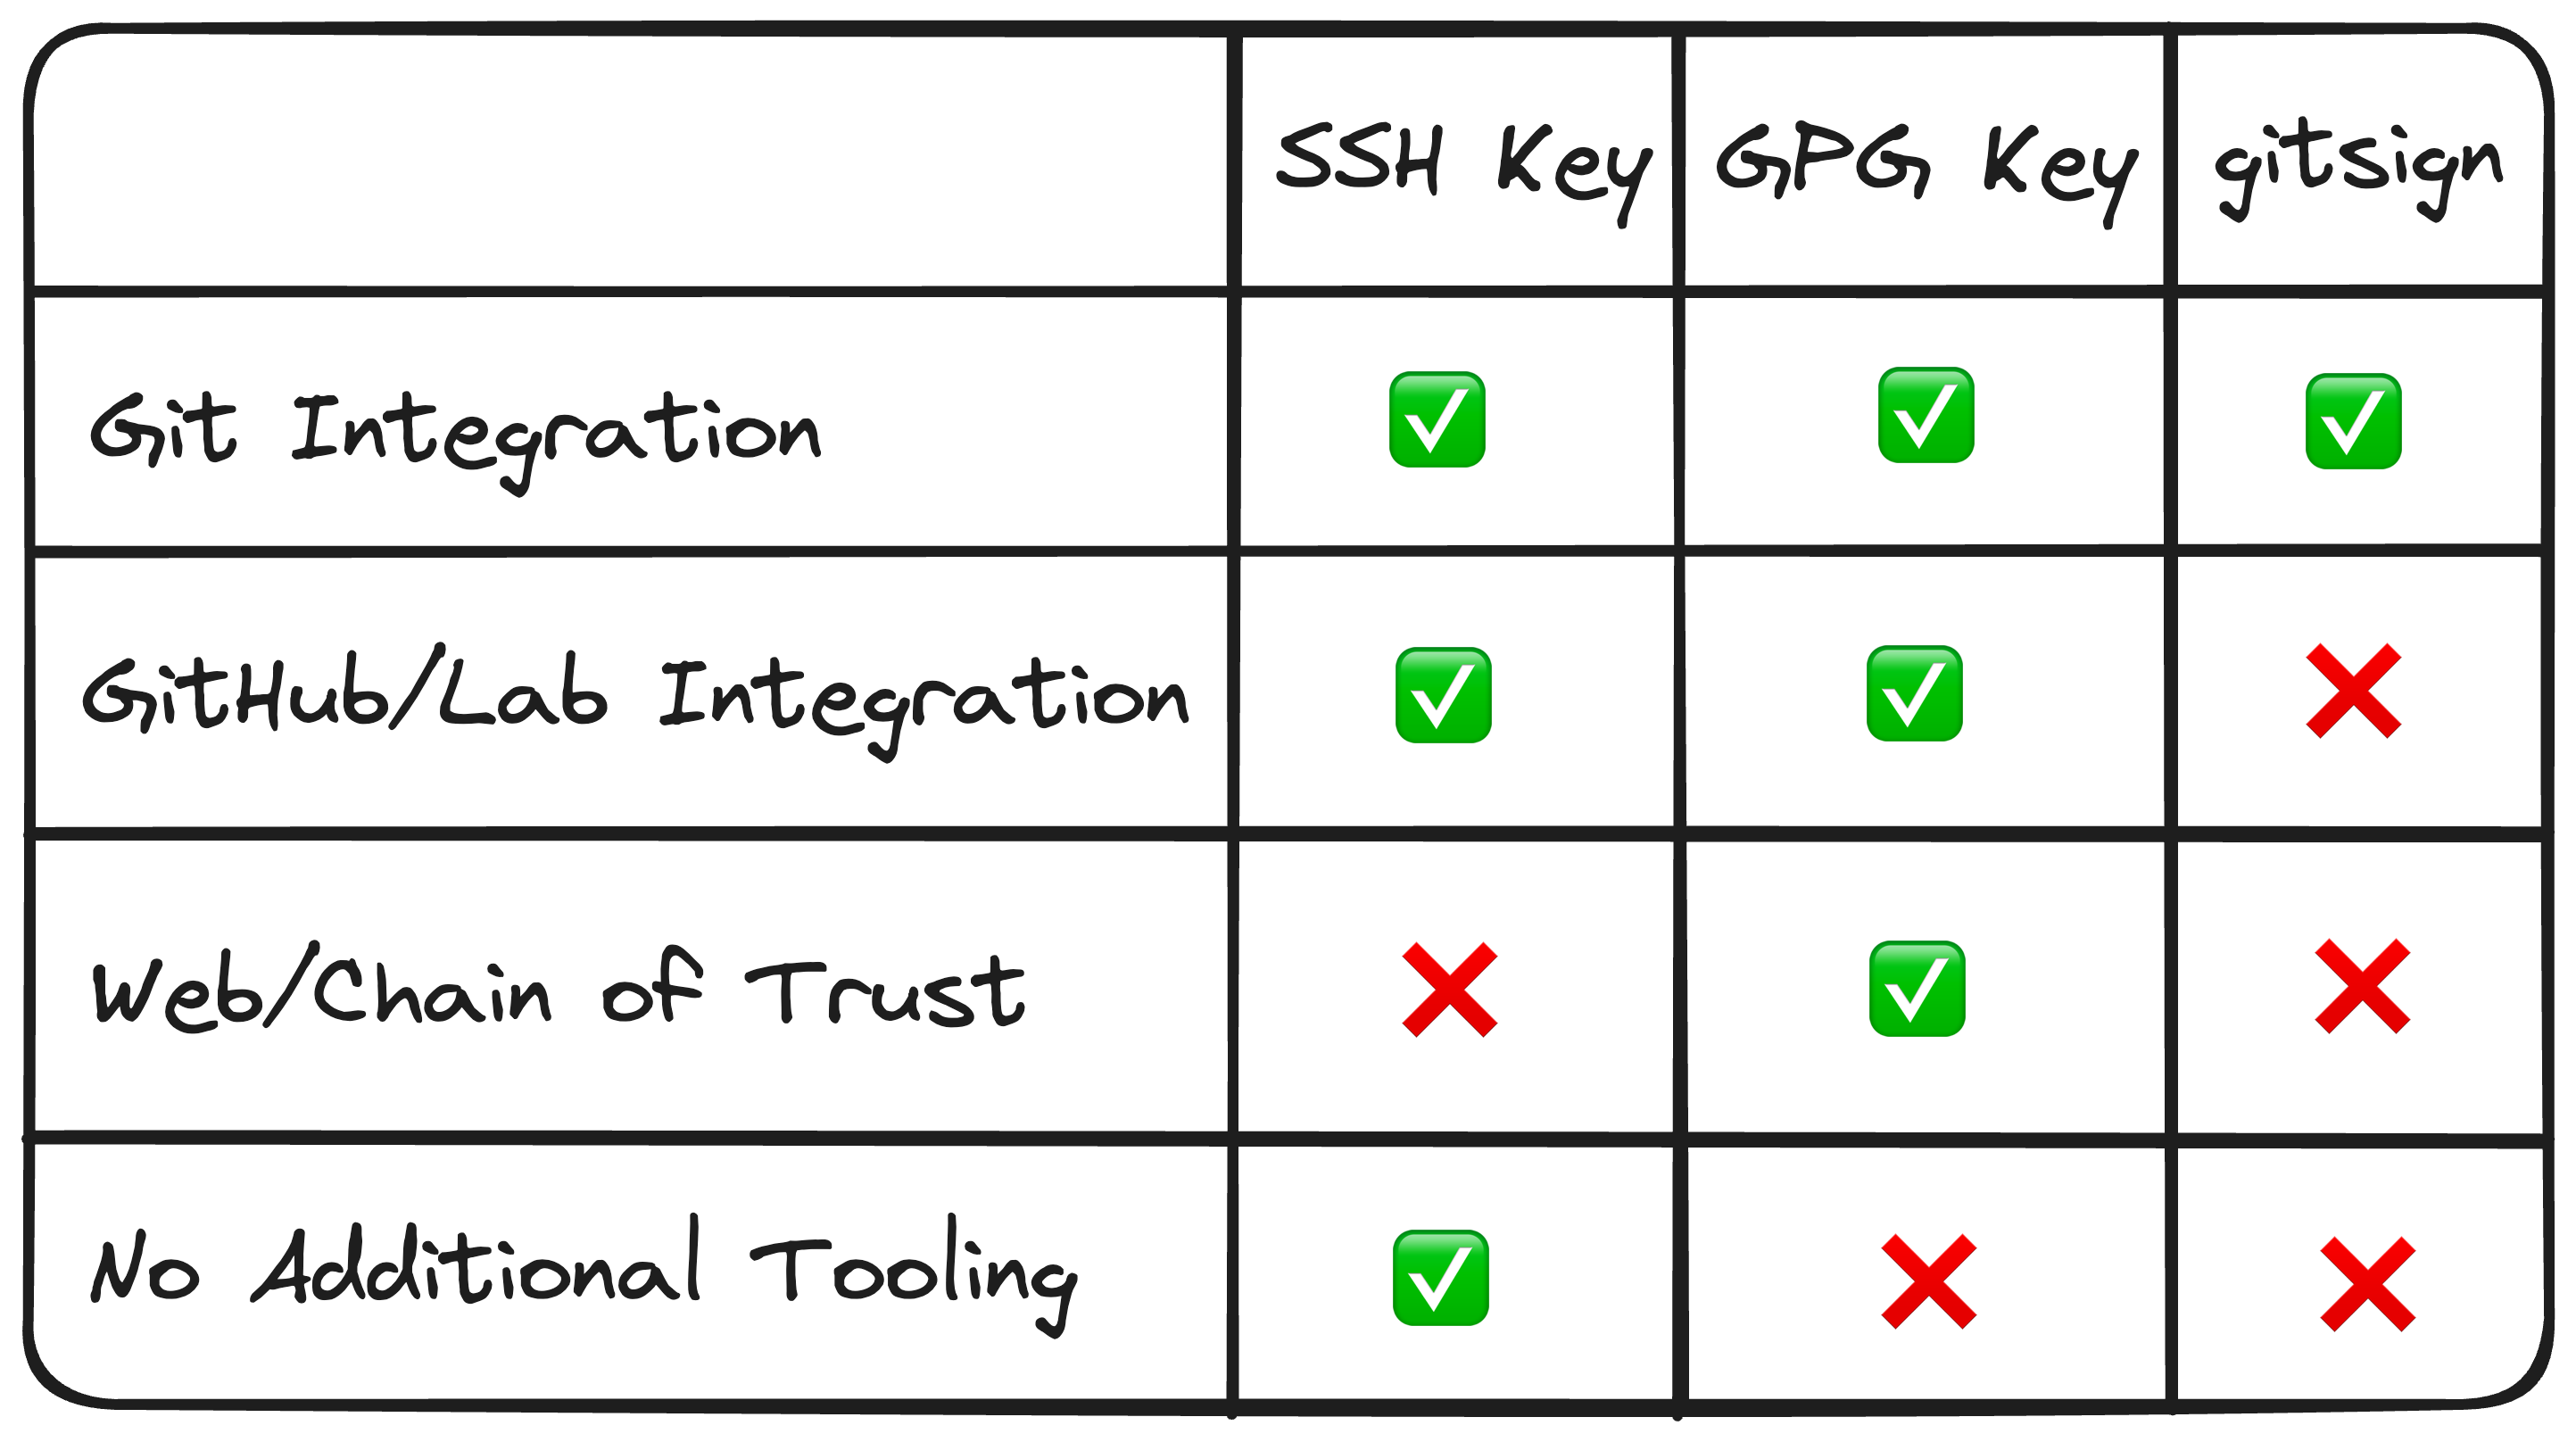 A table comparing the different key qualities of different signing options (SSH key, GPG key, gitsign)